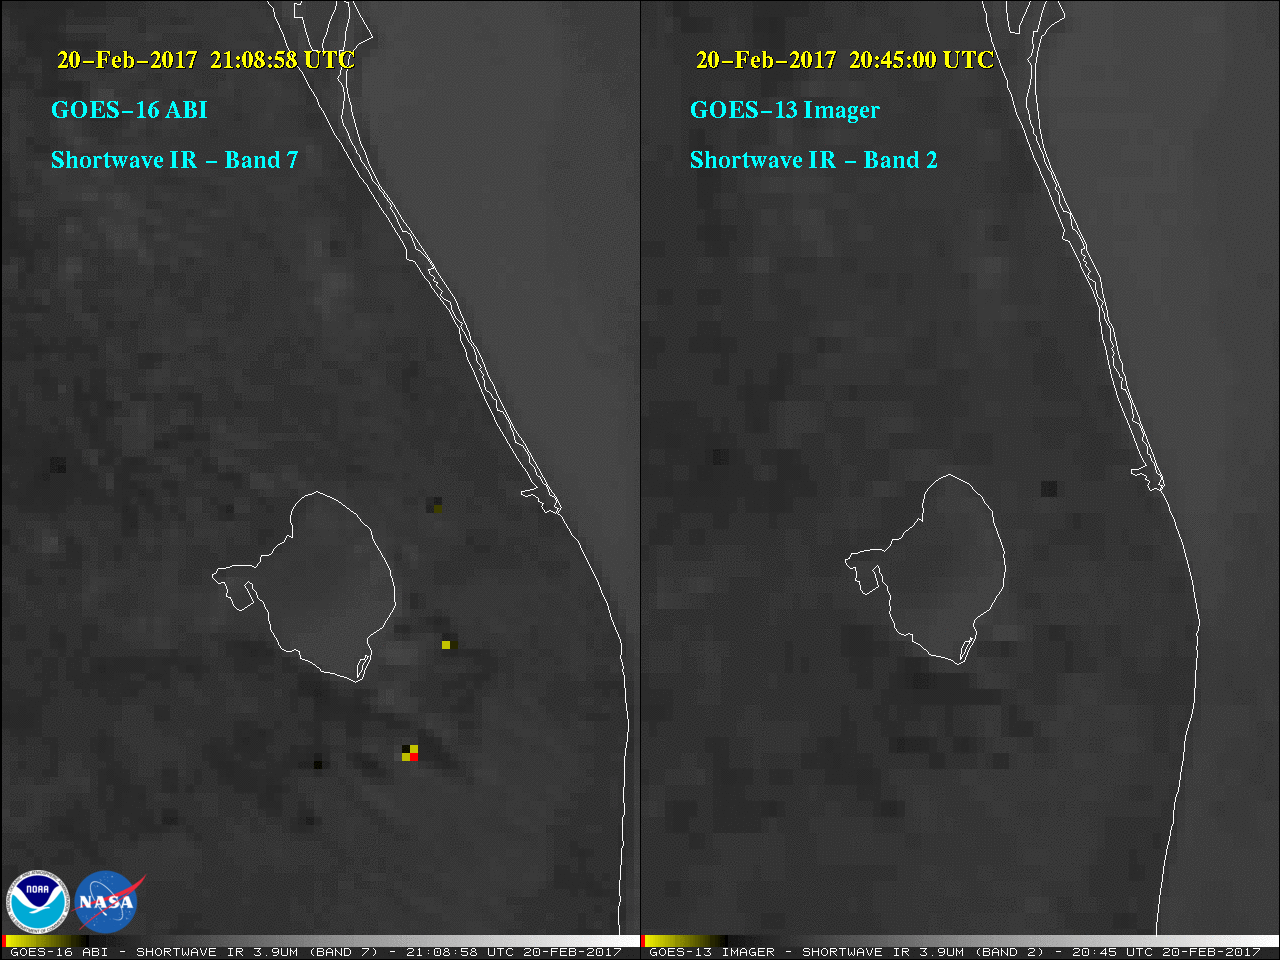 GOES-16 (left) and GOES-13 (right) 3.9 µm Shortwave Infrared images [click to play MP4 animation]